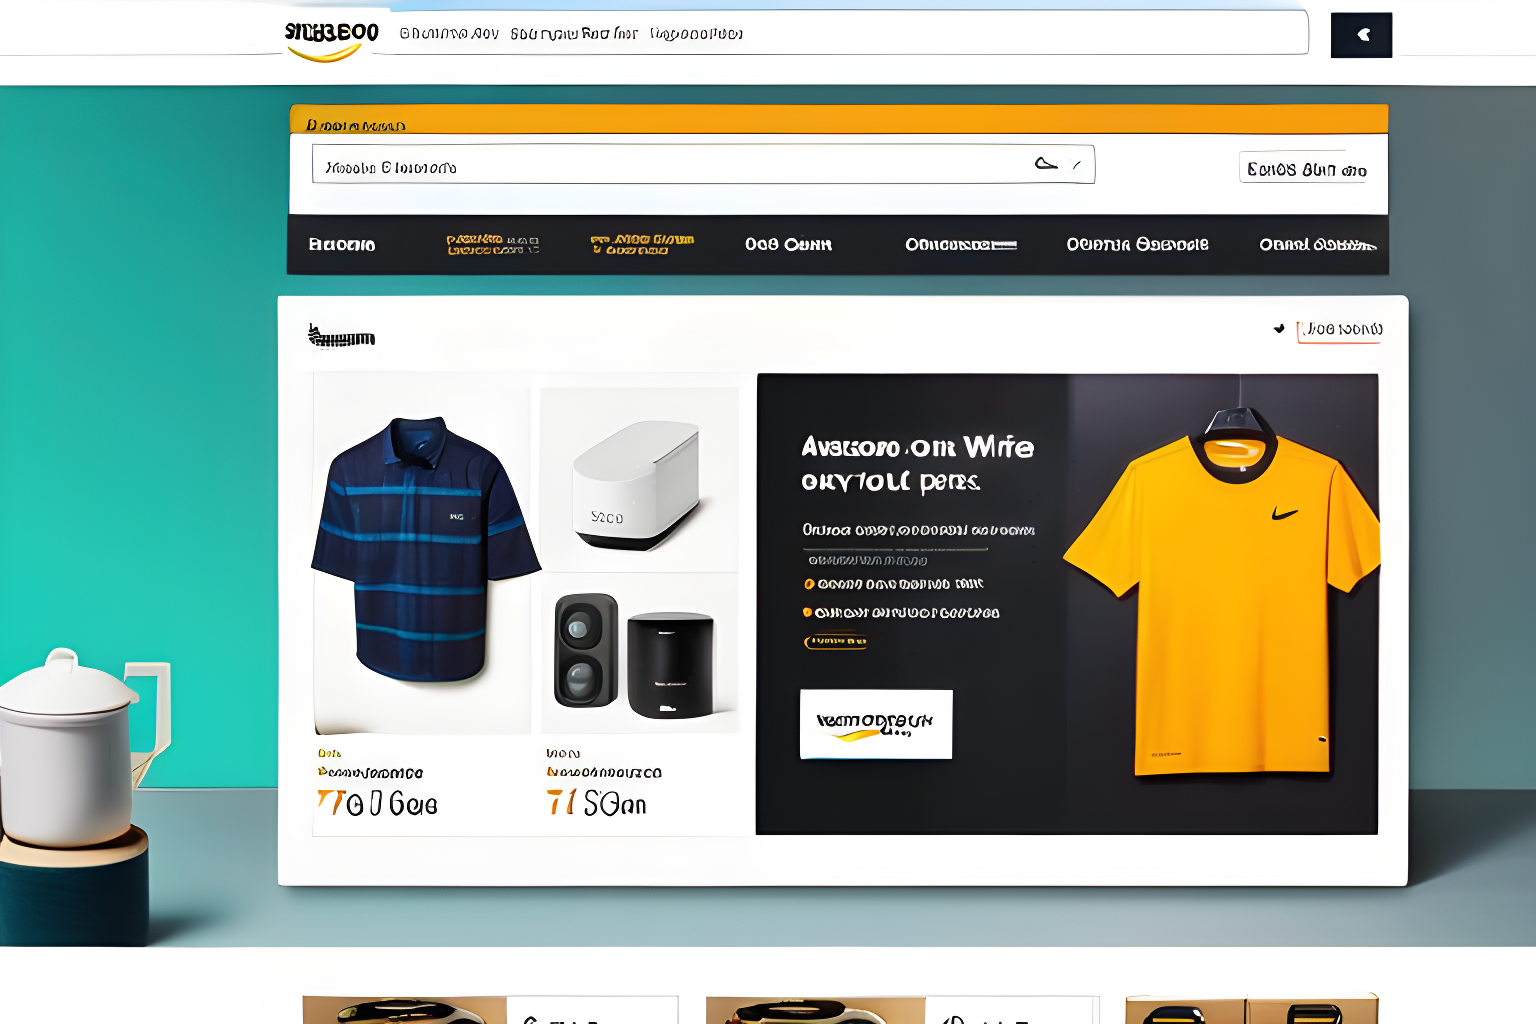 amazon's ecommerce web page, displaying a variety of products